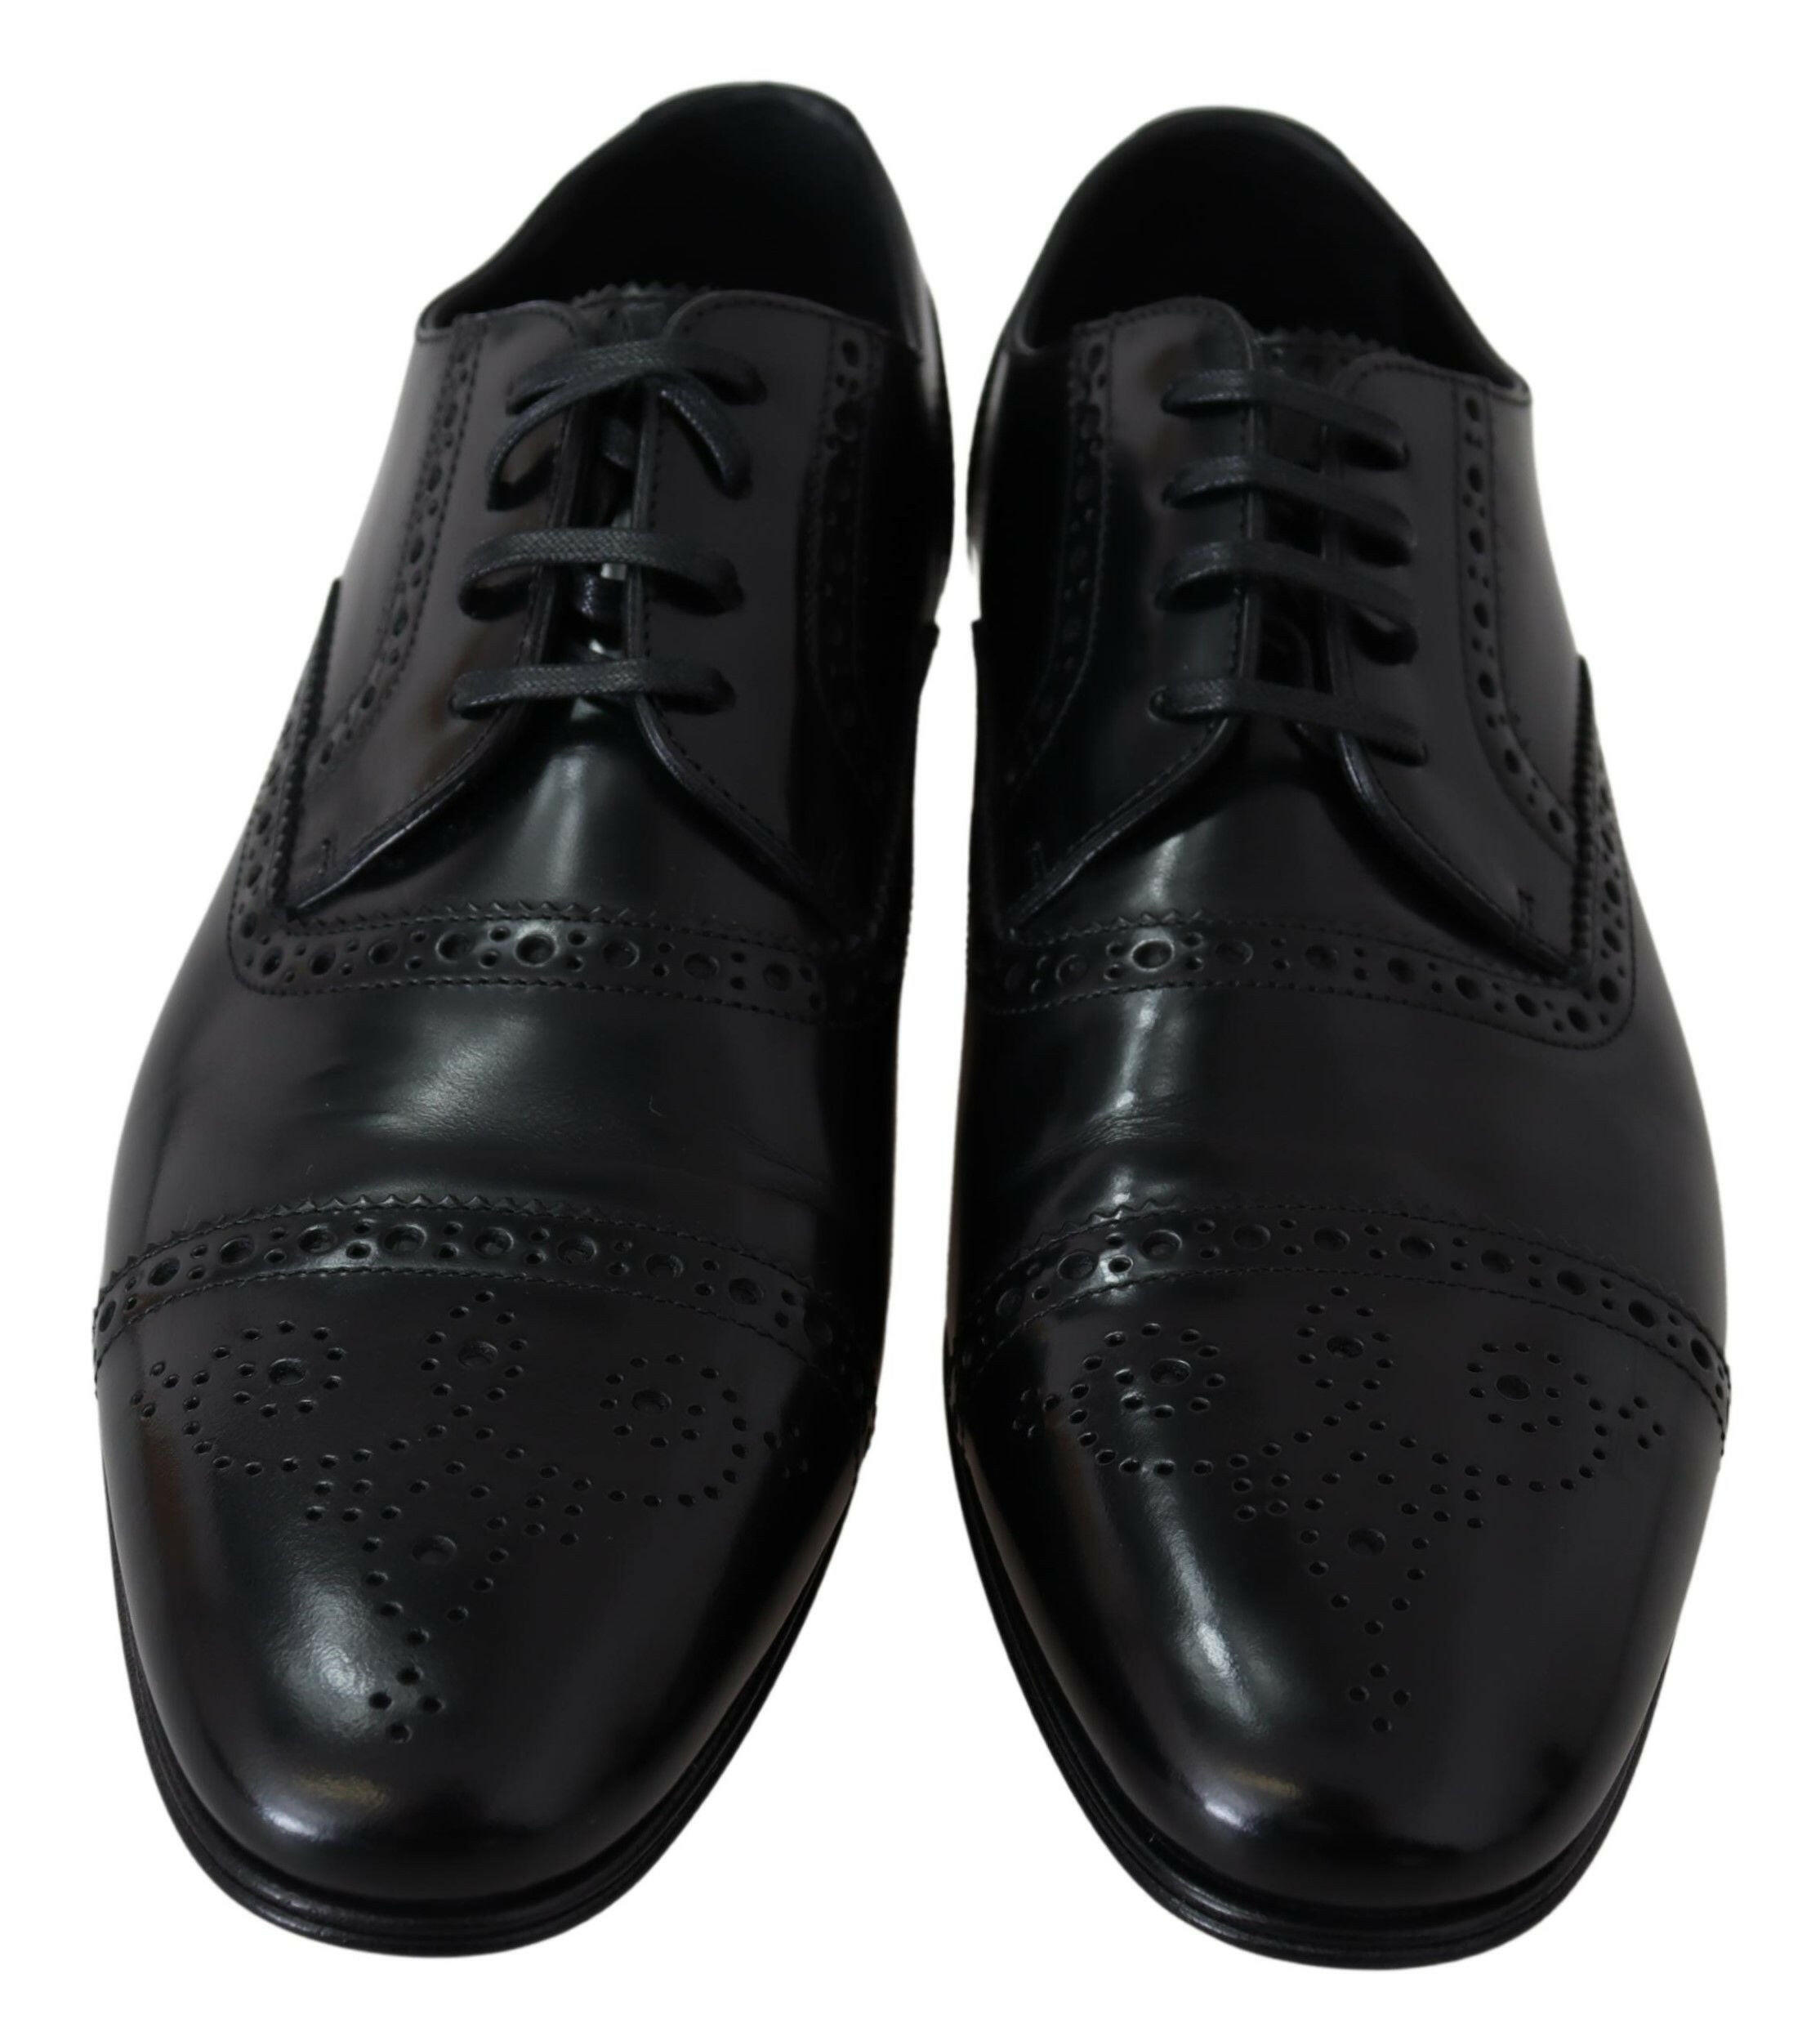 Dolce & Gabbana Black Leather Men Derby Formal Loafers Shoes - GENUINE AUTHENTIC BRAND LLC  